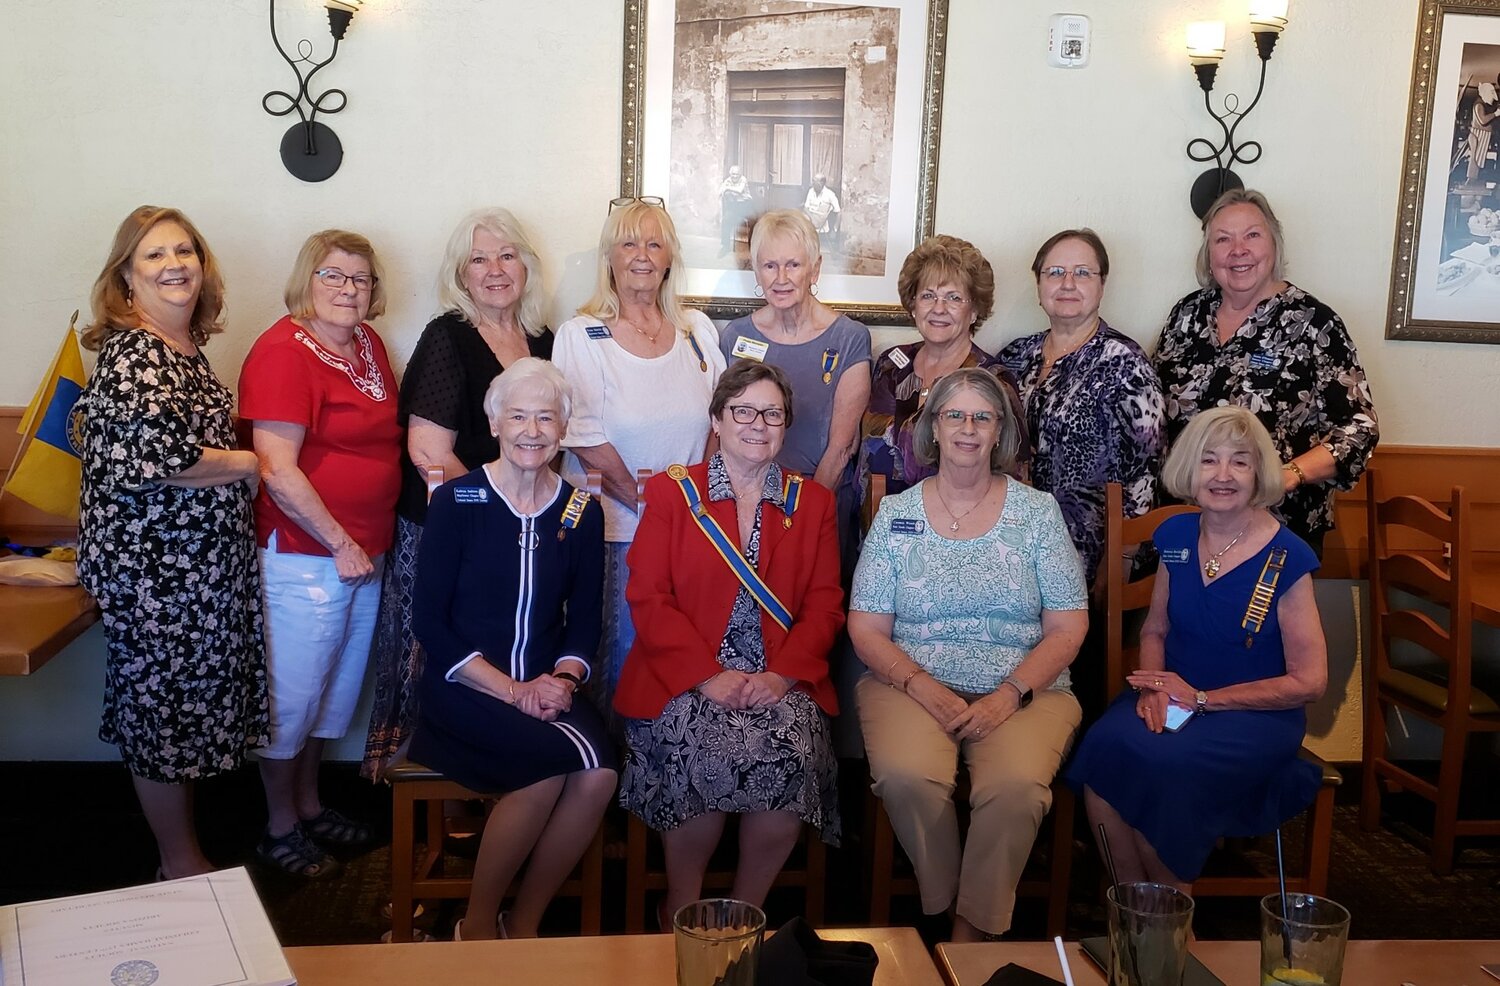 Among those attending the Colonial Dames 17th Century Arizona State Board of Management meeting were Sonora Chapter members Lillian Schauer and Sandy O’Donnell, standing on the far right.